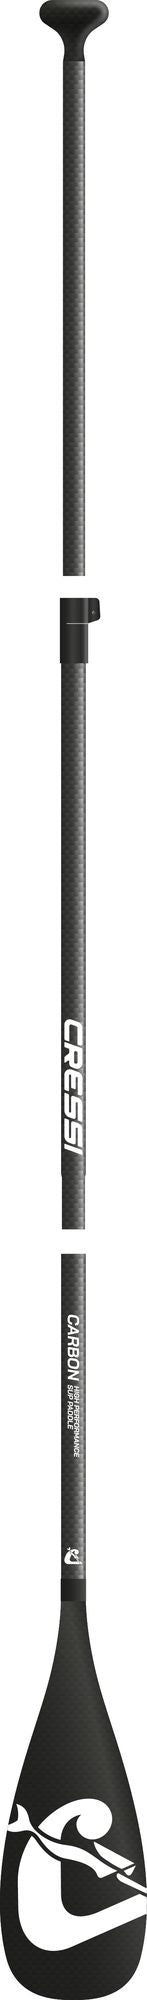 Carbon Sup Paddle